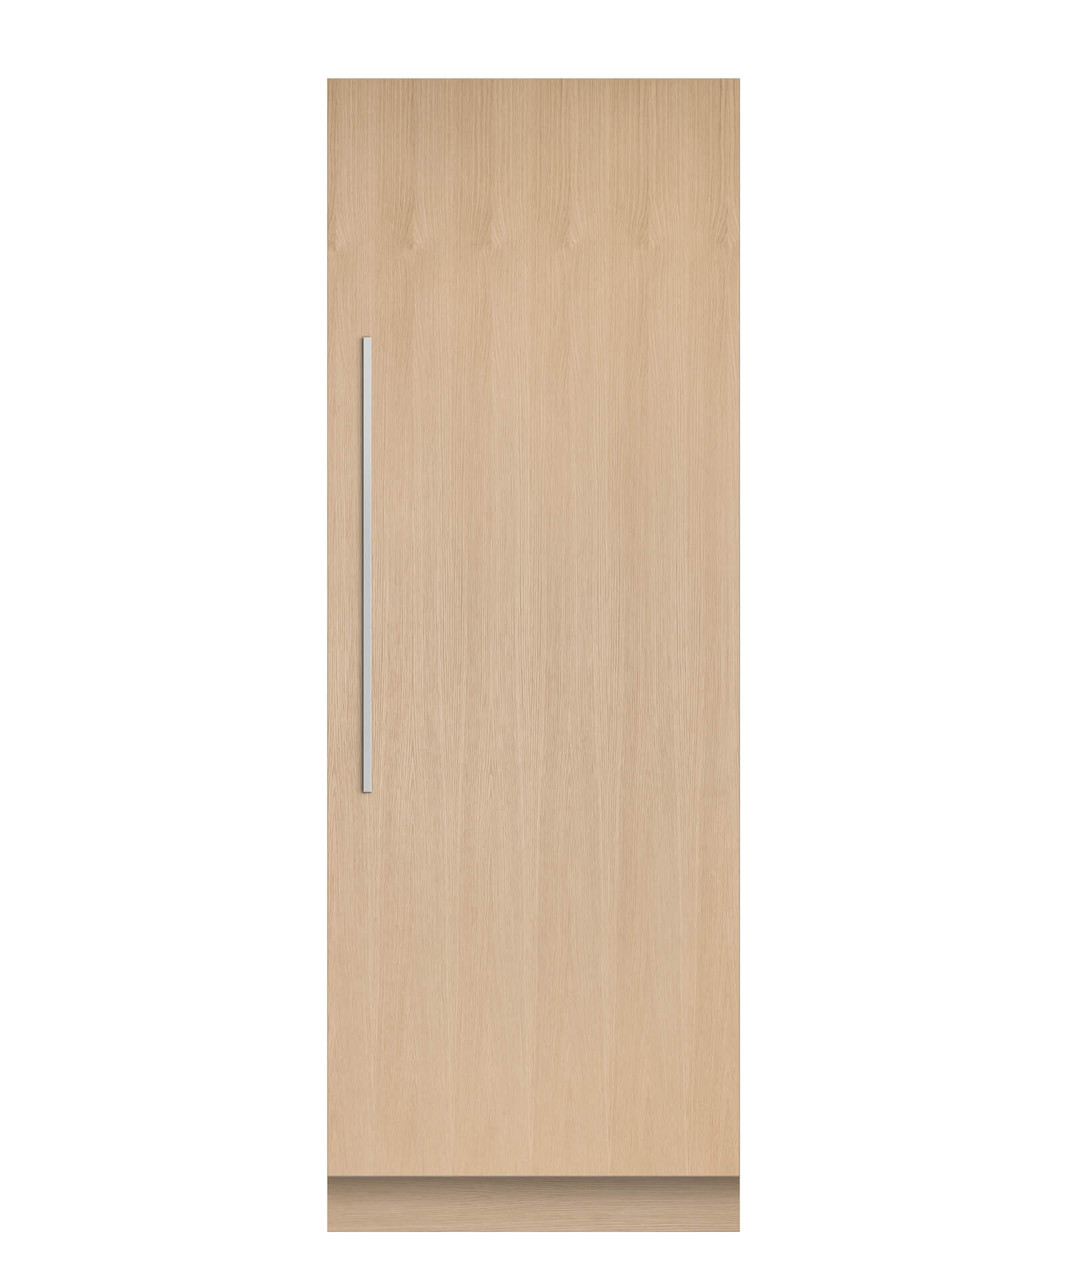 RS7621SRK1 - 498L Integrated Column Refrigerator 762mm - Stainless Steel Interior, Right hinge